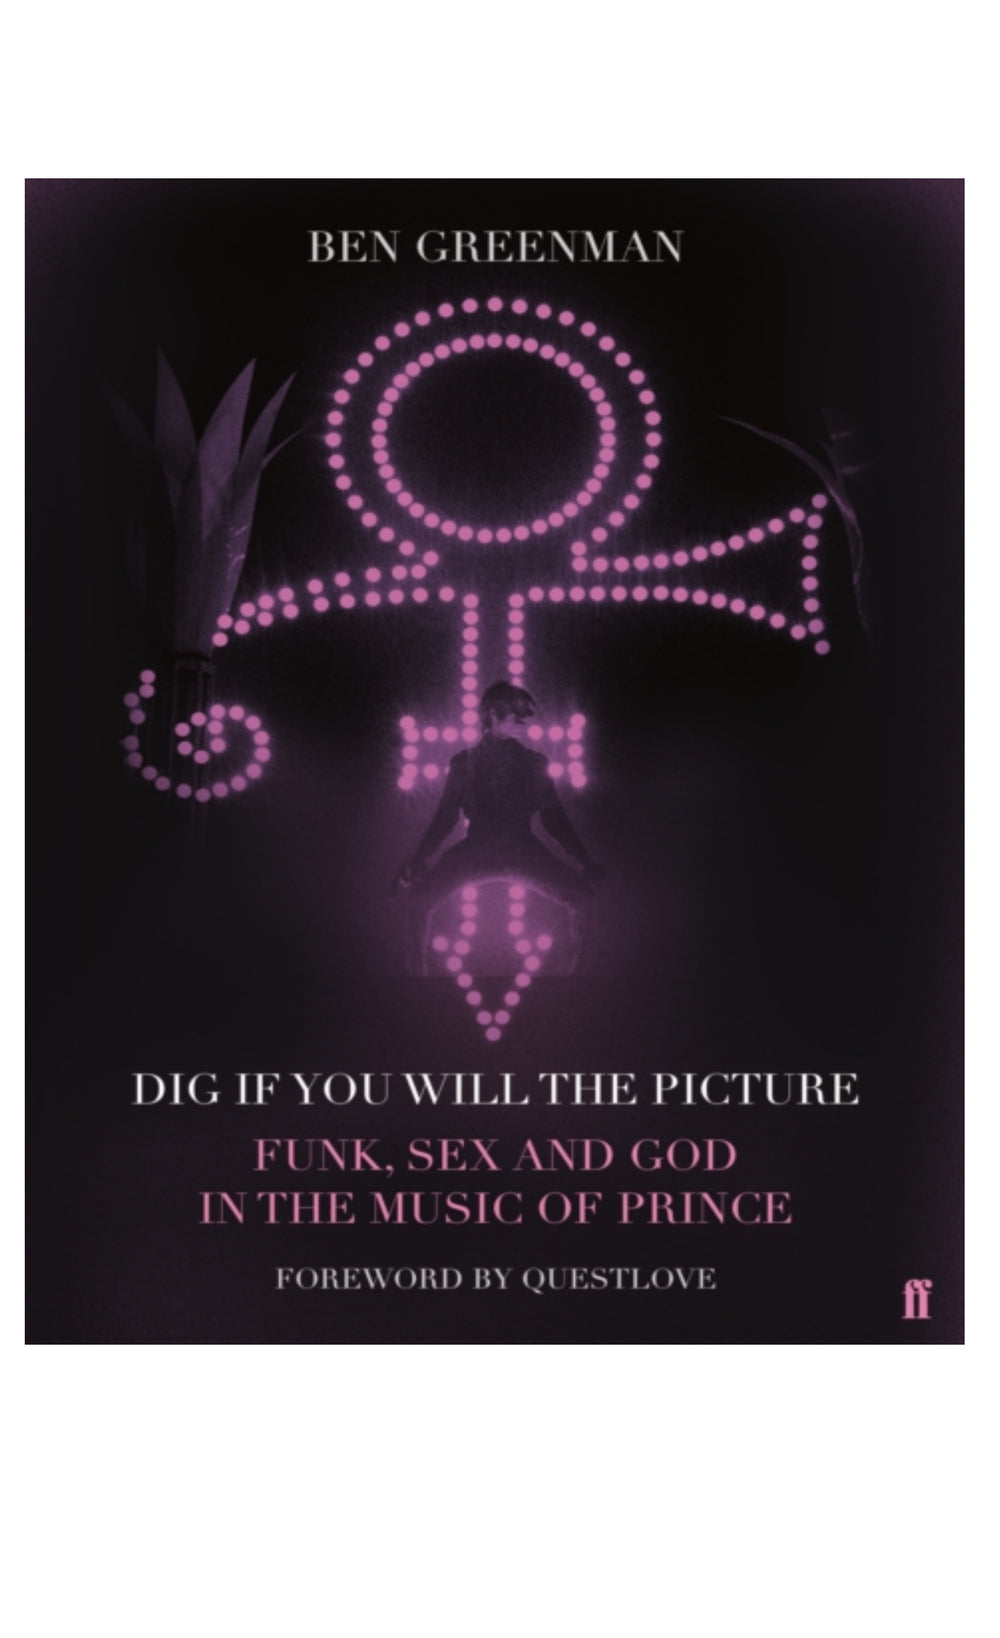 Dig If You Will the Picture : Funk, Sex and God in the Music of Prince Book by Ben Greenman